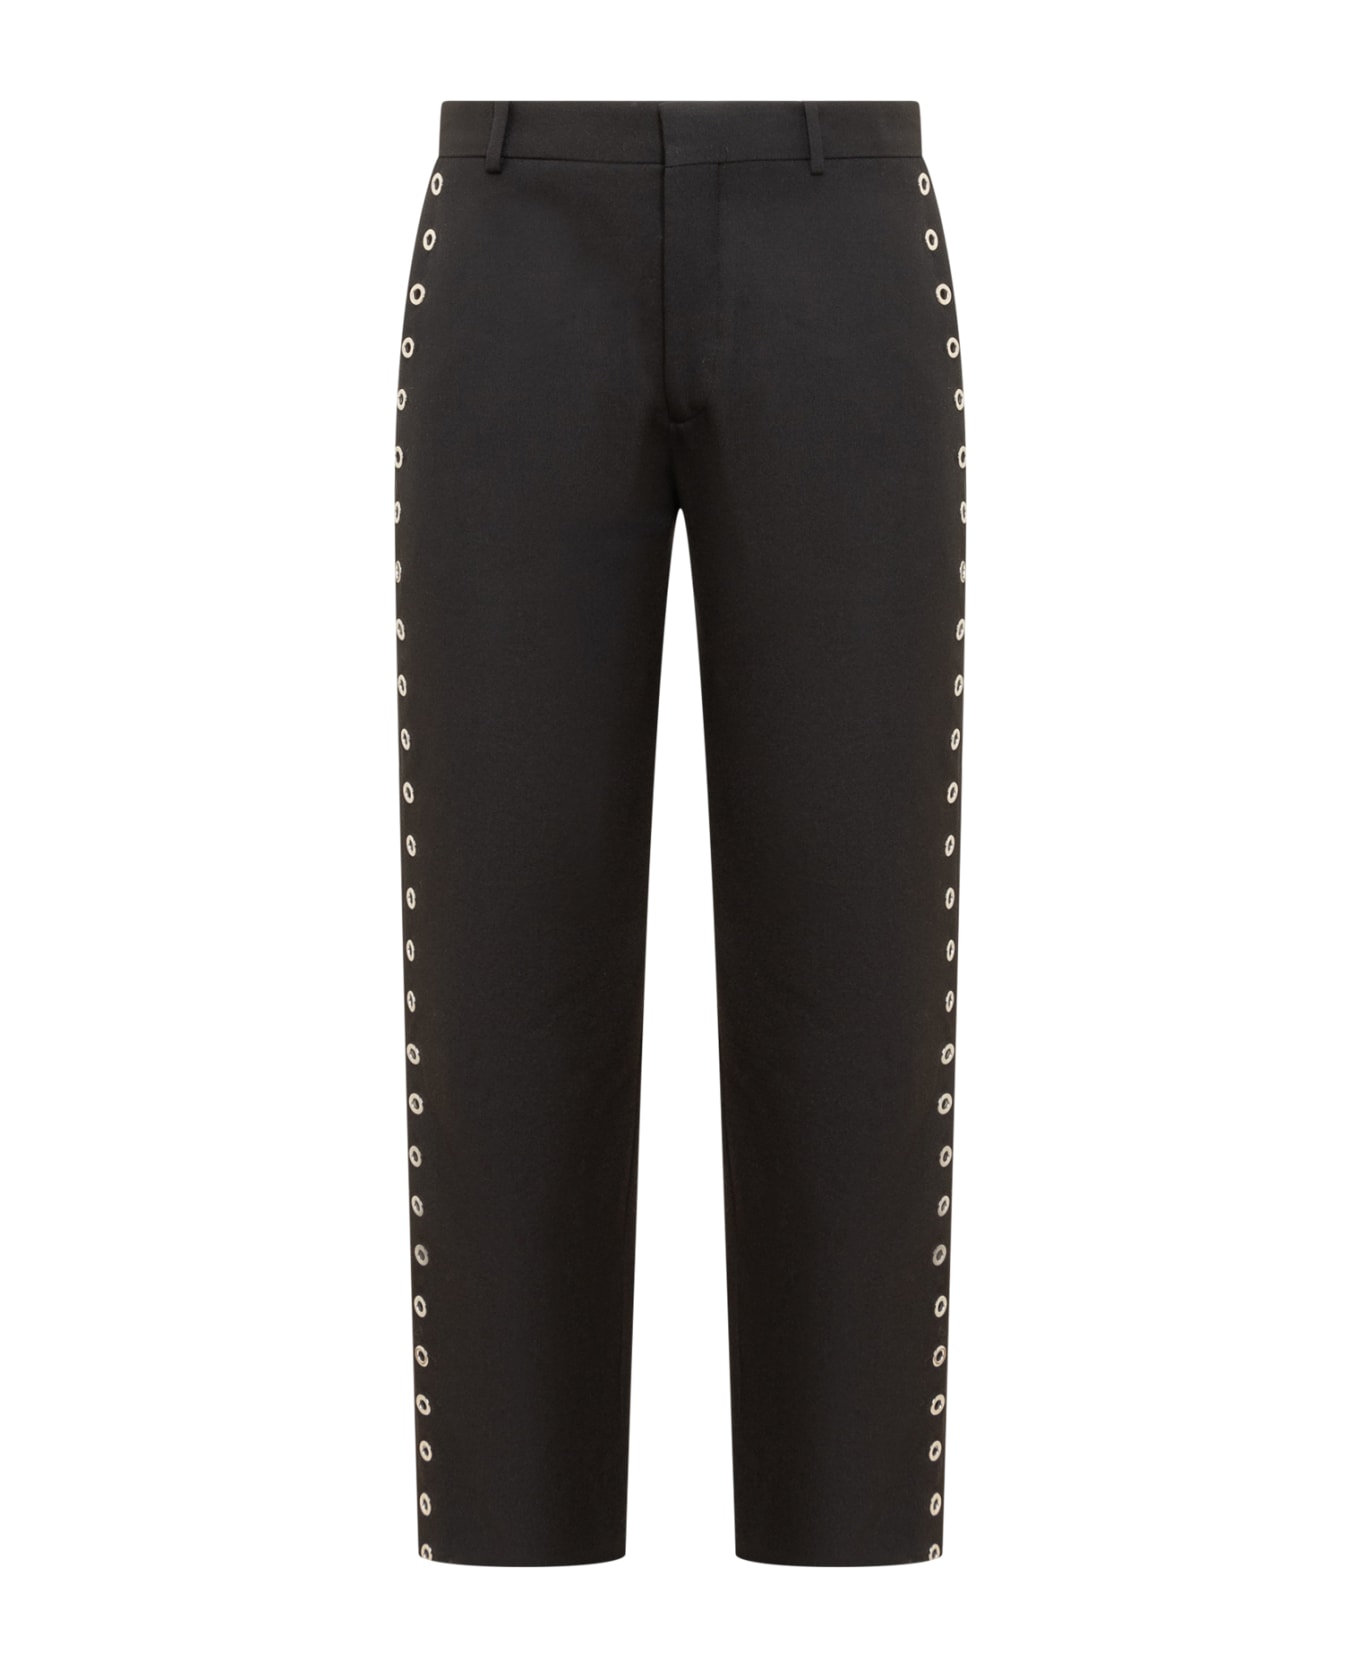 Off-White Wool Pants With Eyelets - Black ボトムス